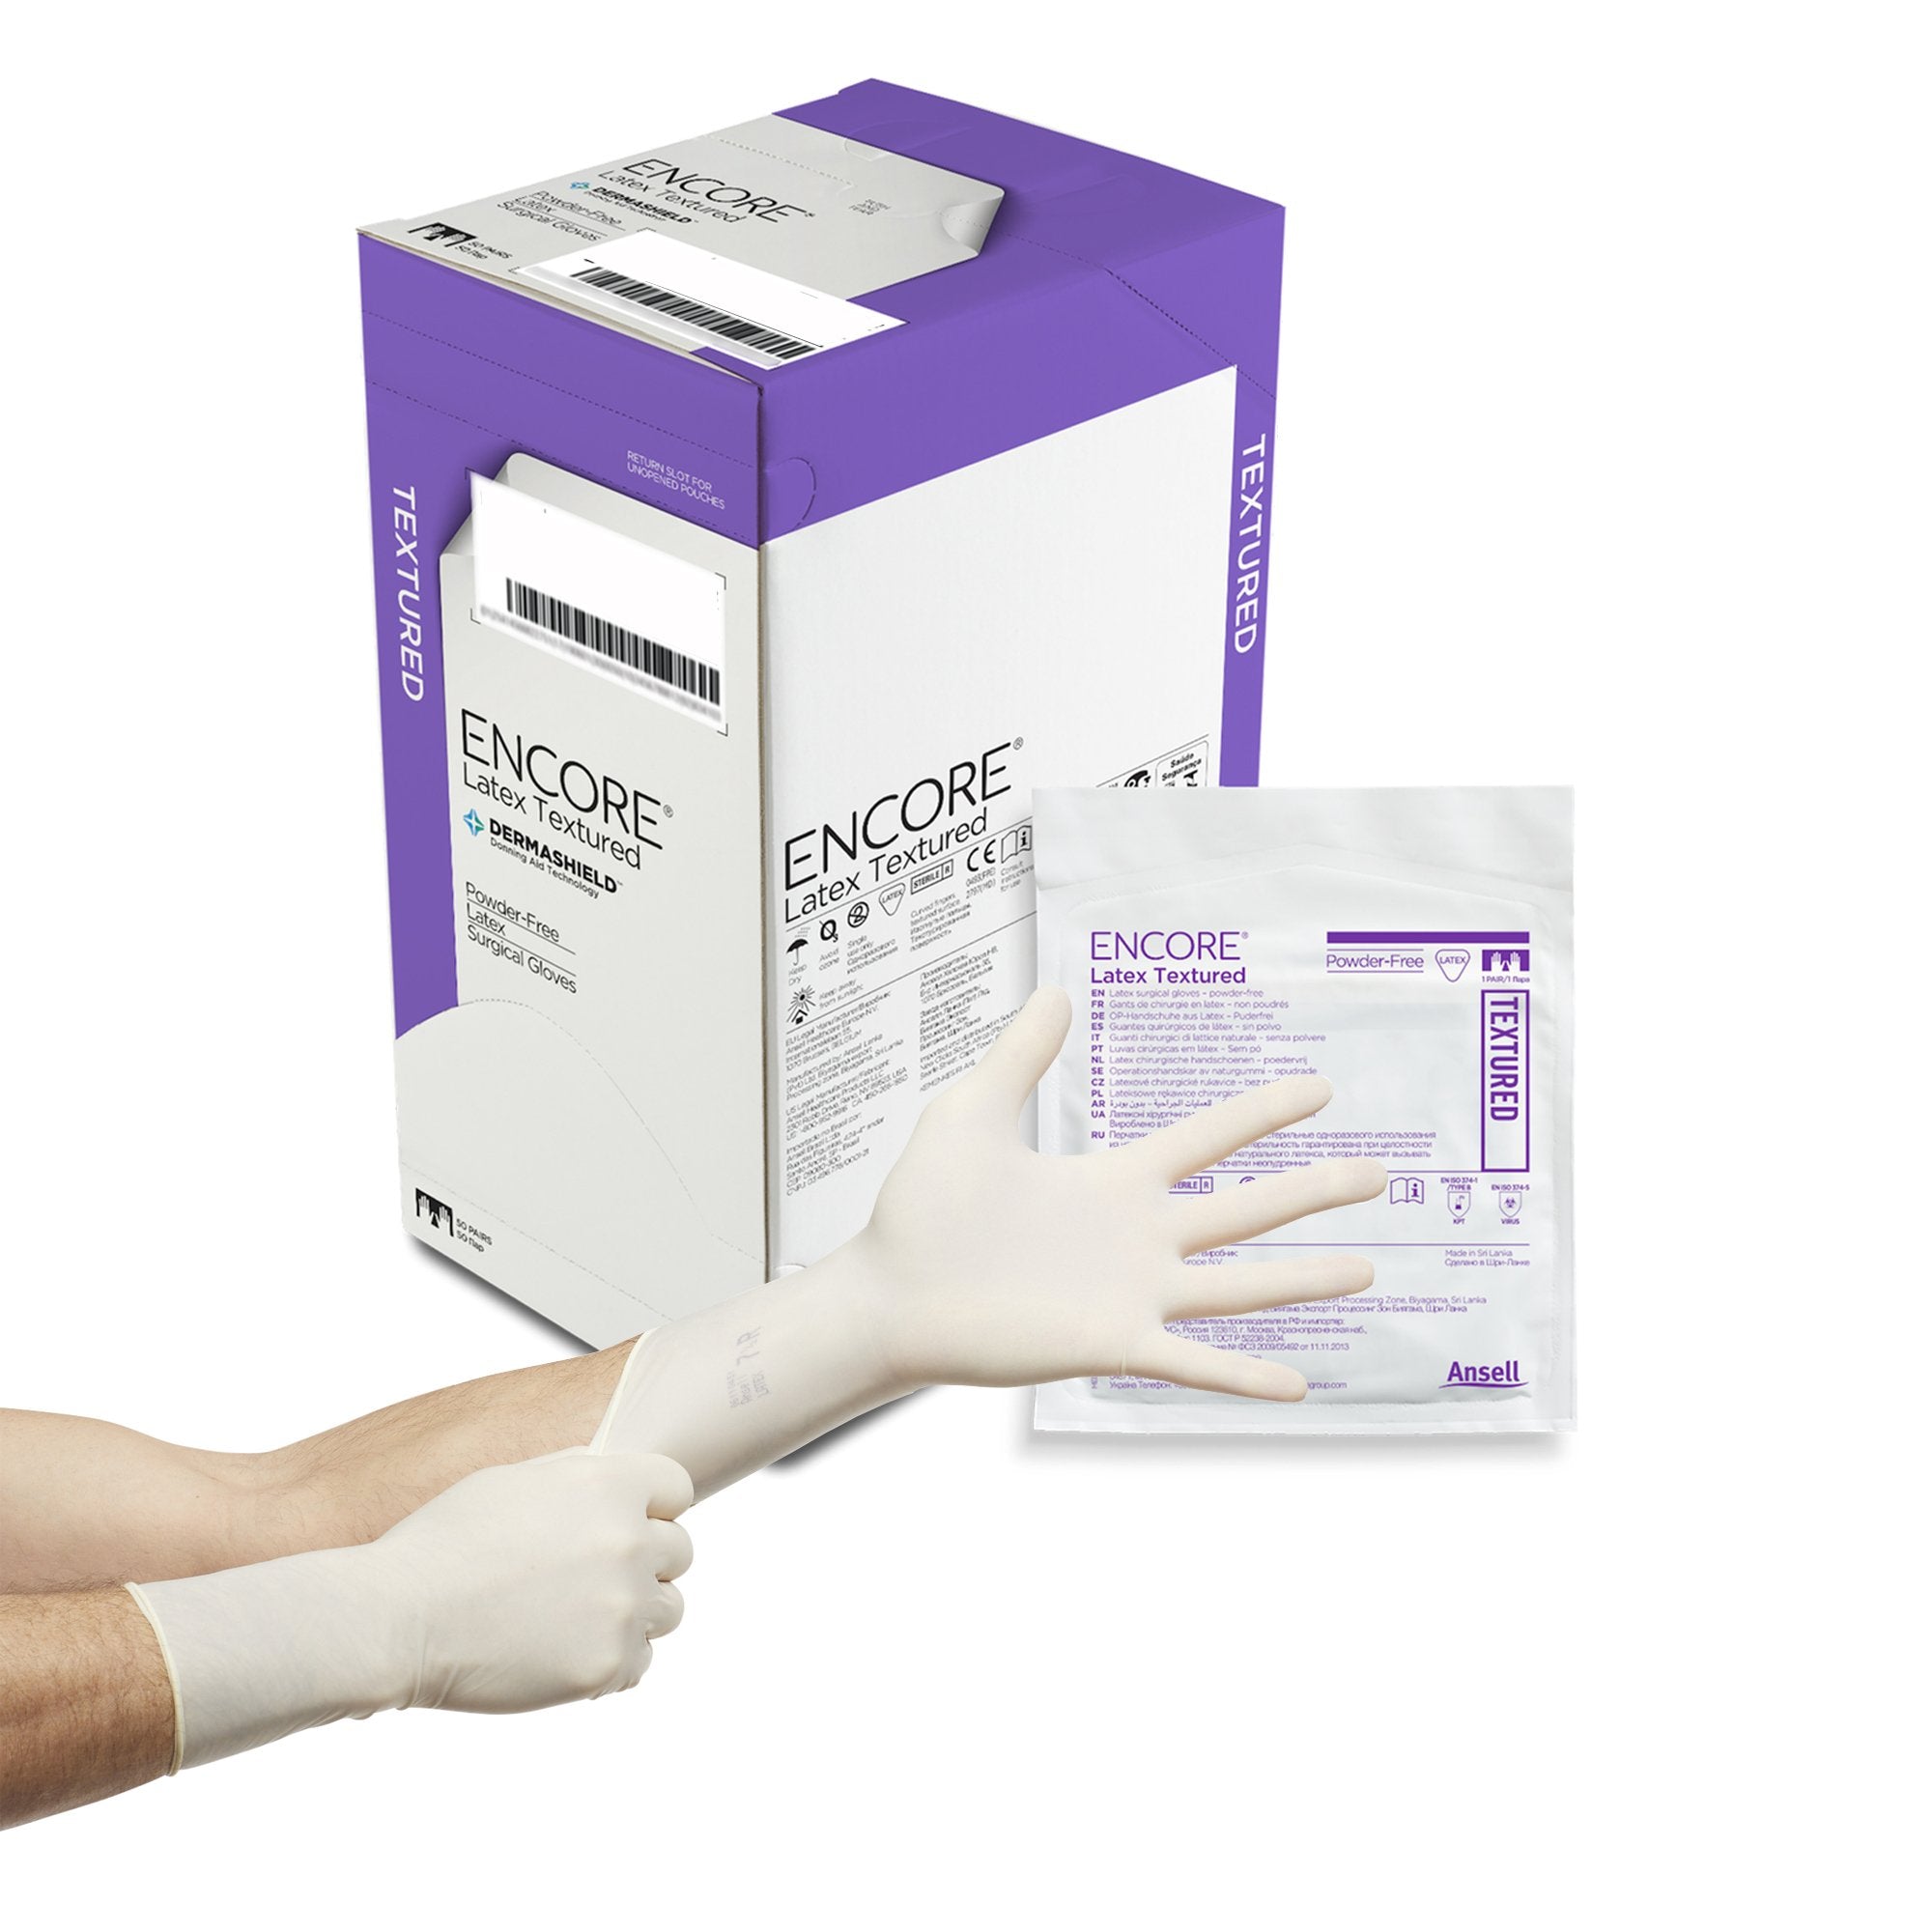 ANSELL  5785Ansell #5785001 Surgical Glove ENCORE® Latex Textured Size 6 Sterile - 50prs/bx